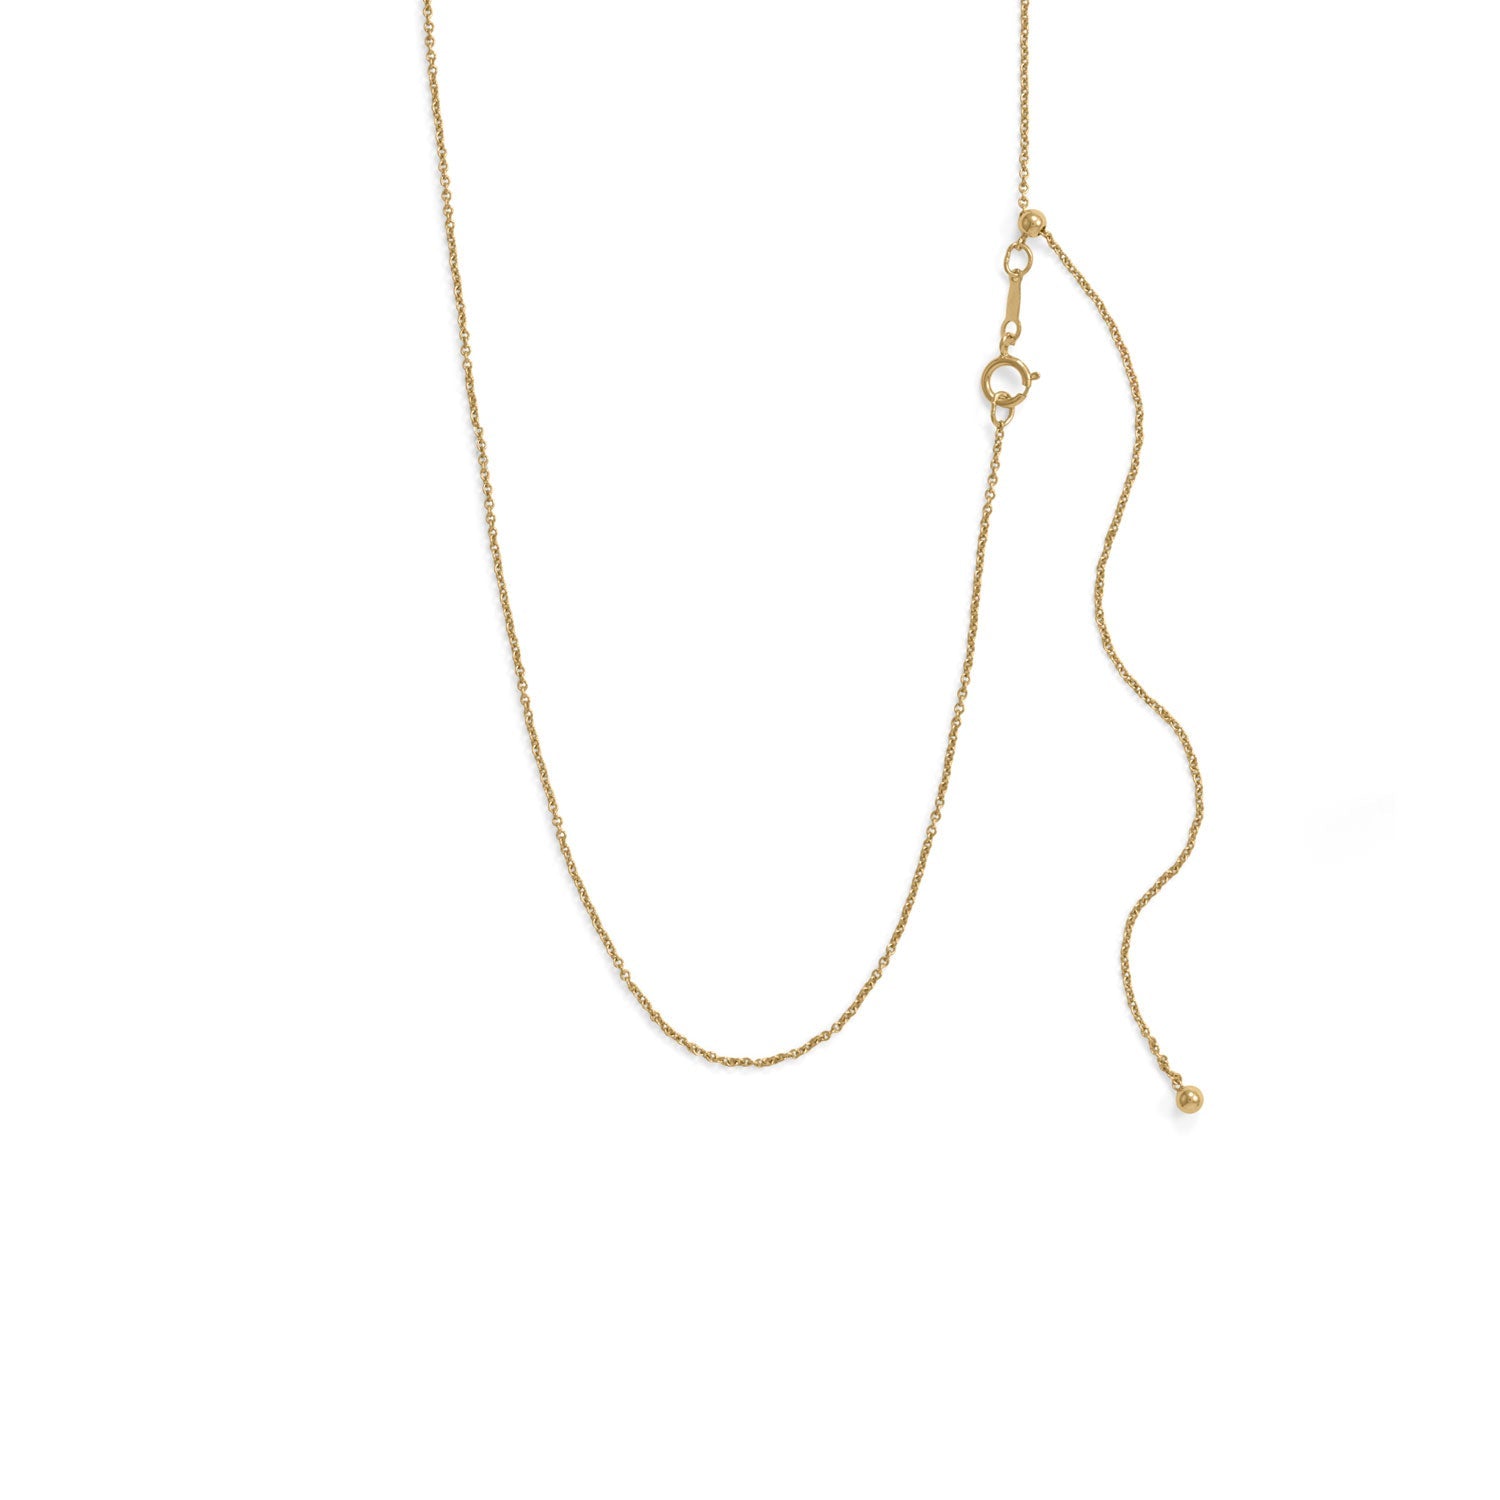 Adjustable 14/20 Gold-Filled Cable Chain